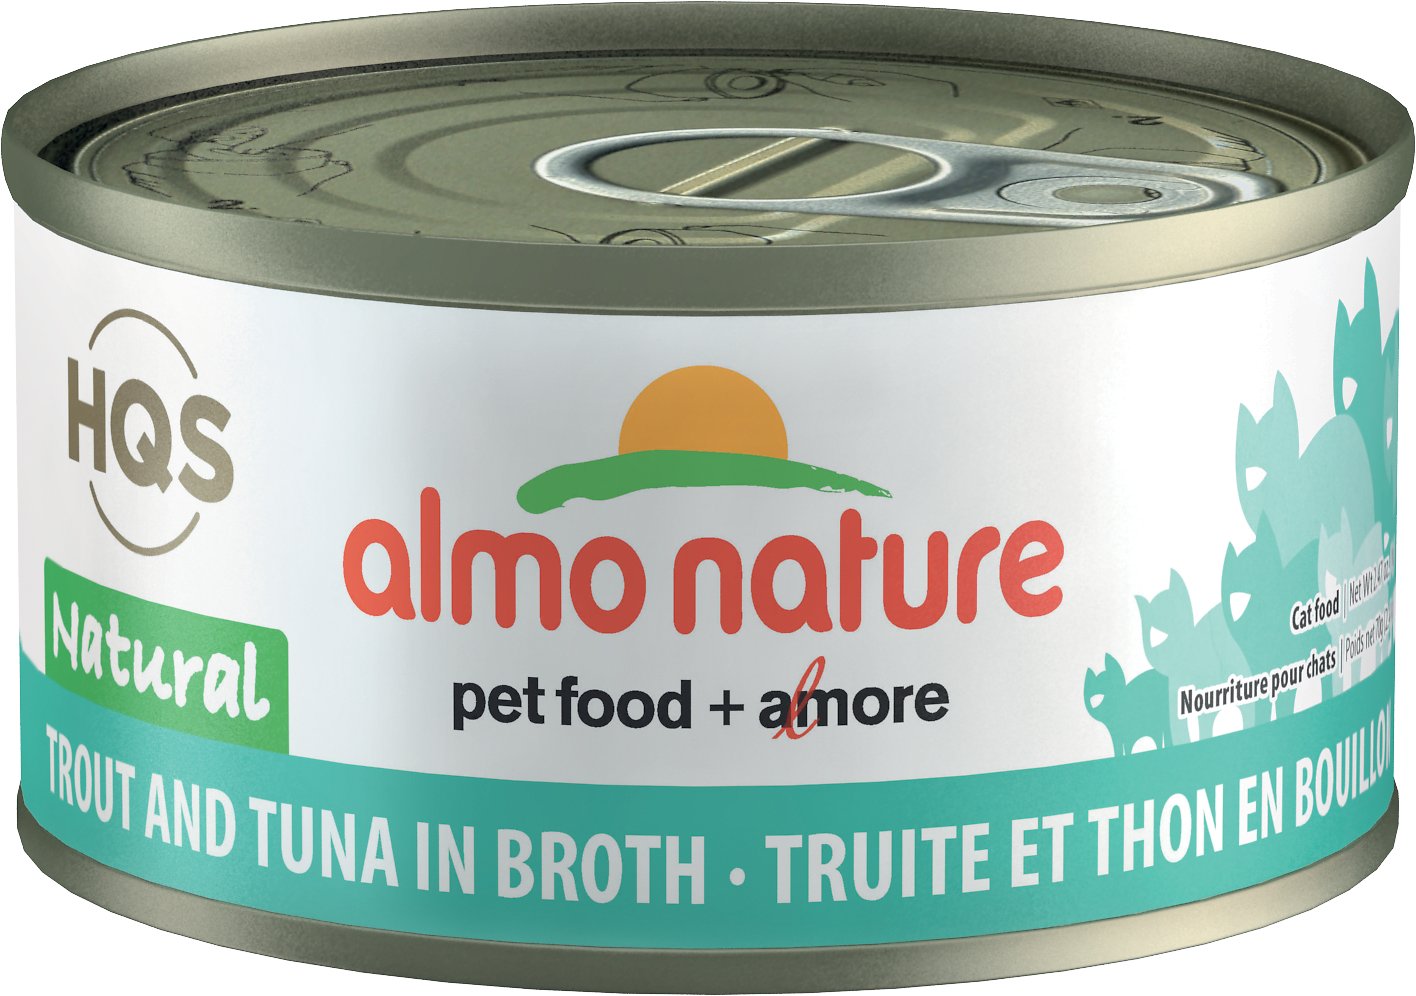 Almo Nature | Wet Cat Food | HQS Natural Tuna, Mackerel, Chicken & Shrimp, Trout & Tuna Variety Pack | ARMOR THE POOCH